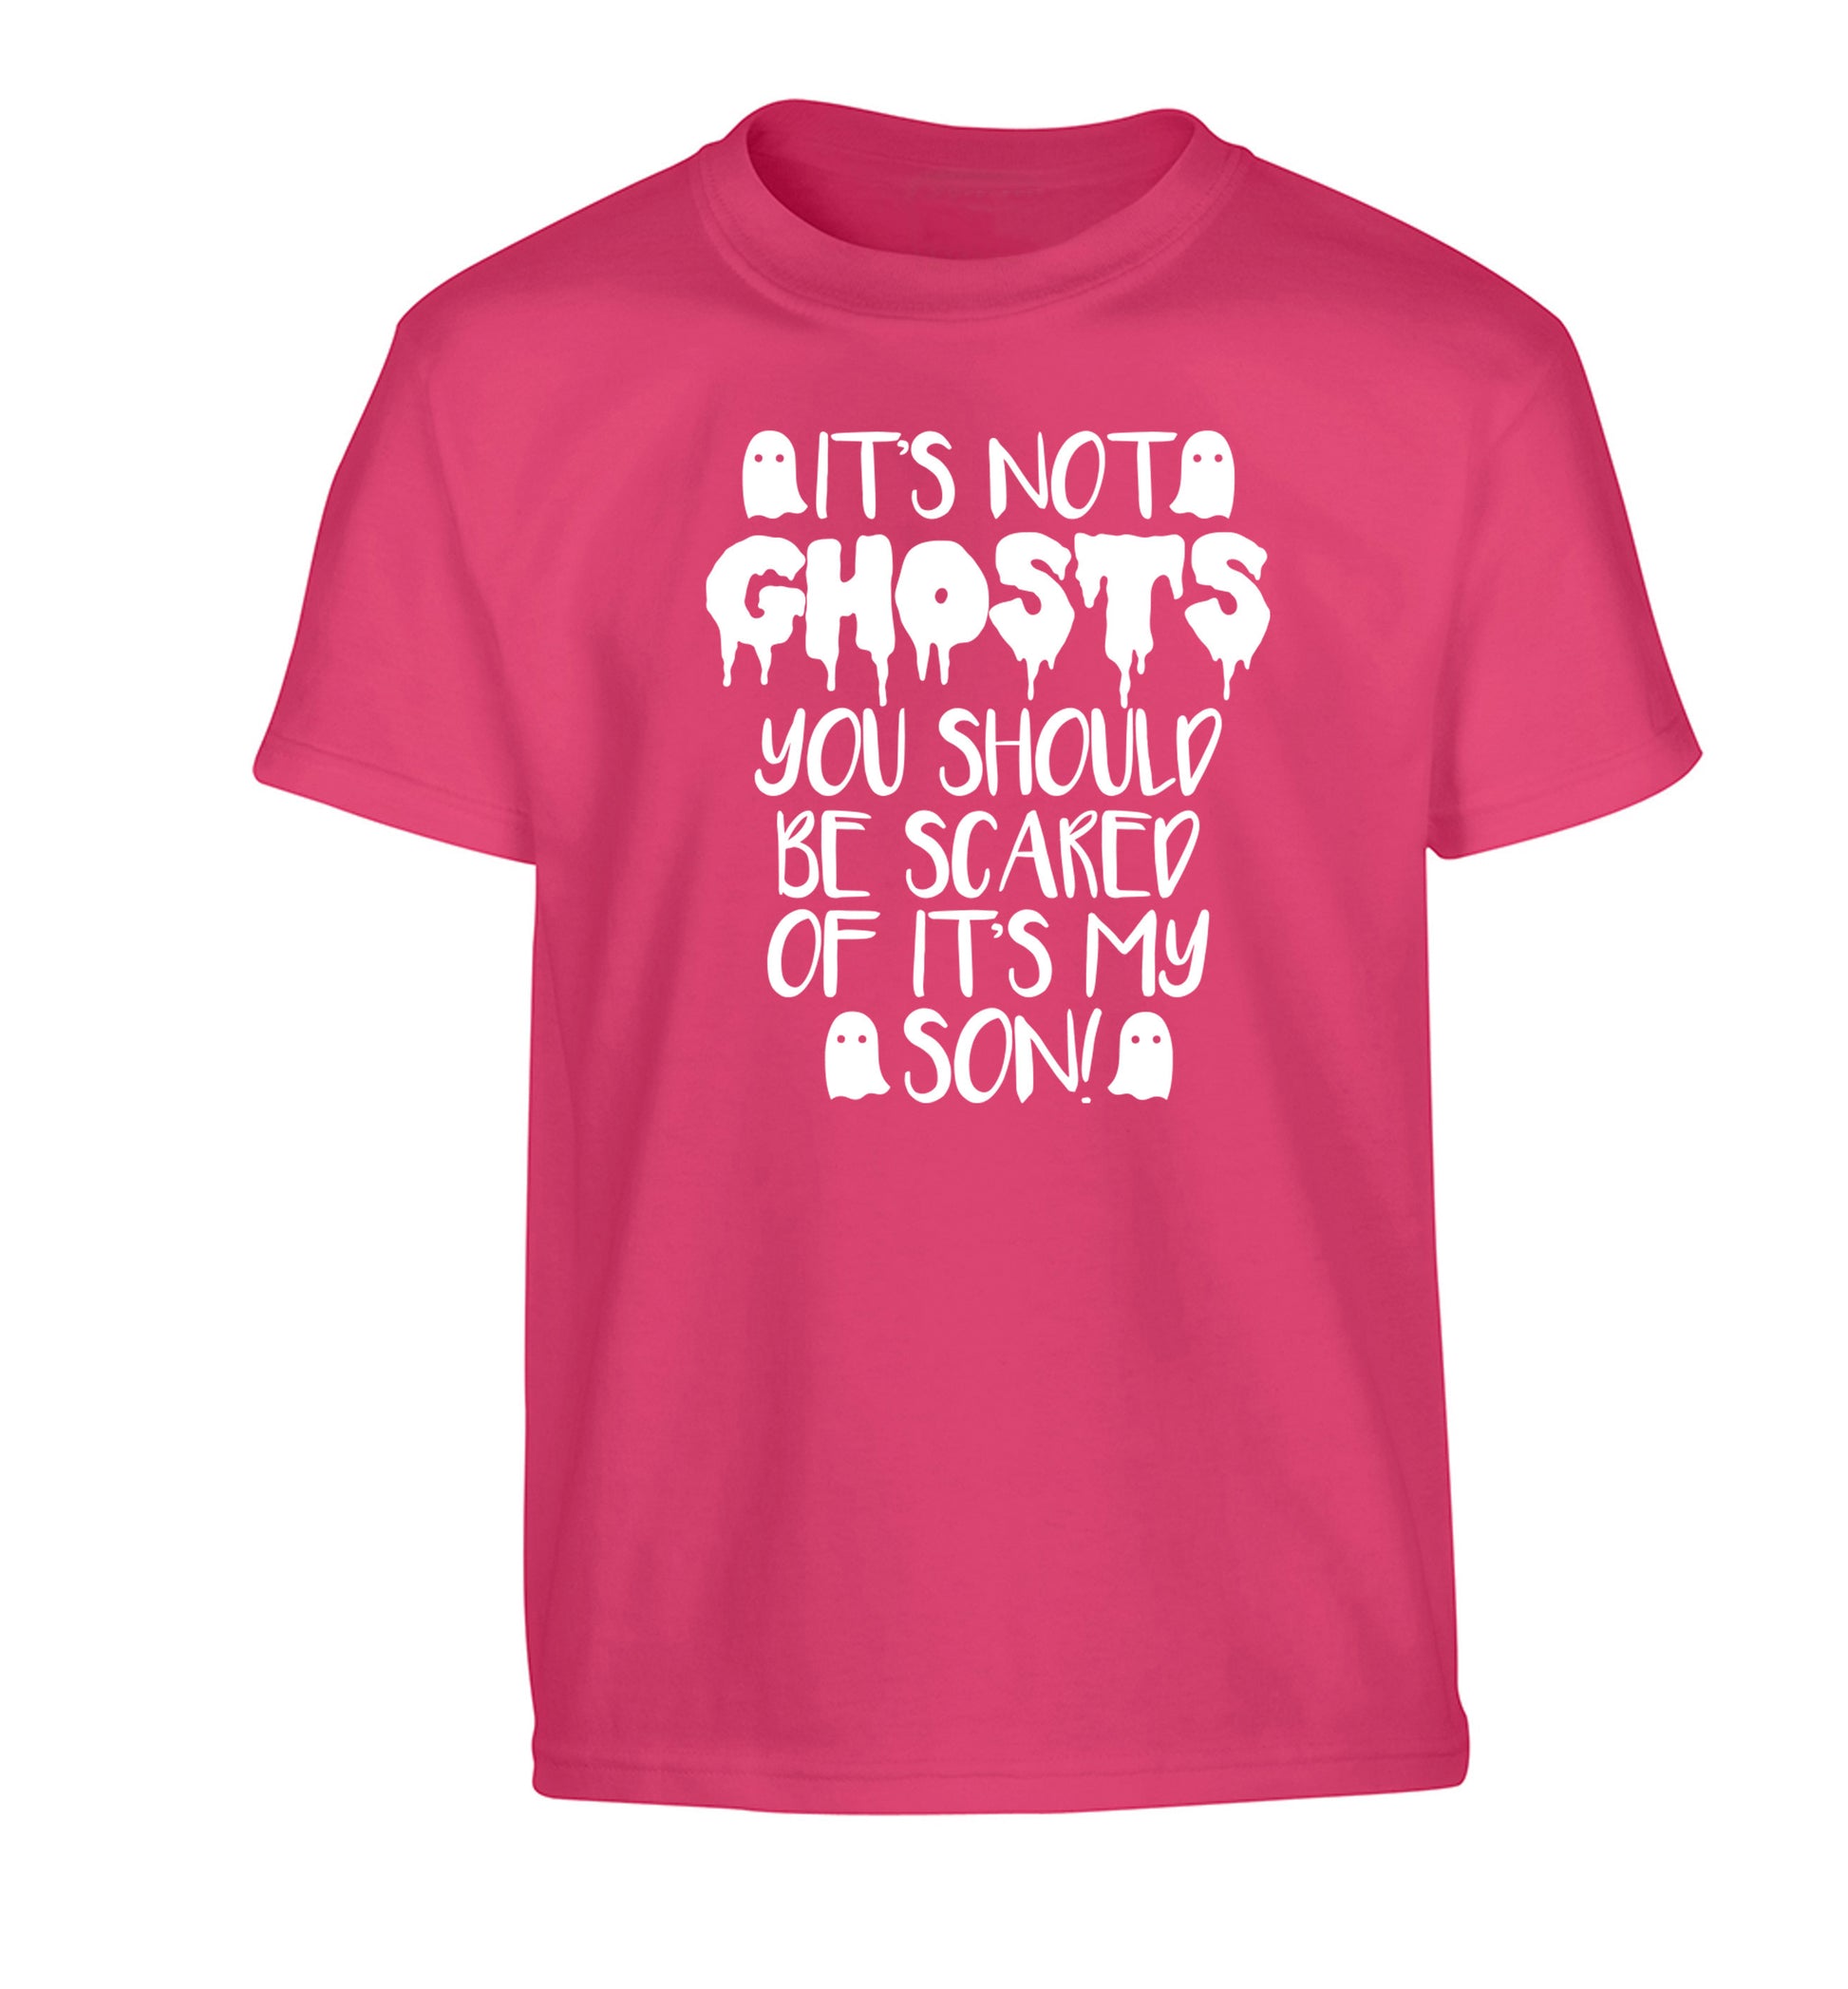 It's not ghosts you should be scared of it's my son! Children's pink Tshirt 12-14 Years